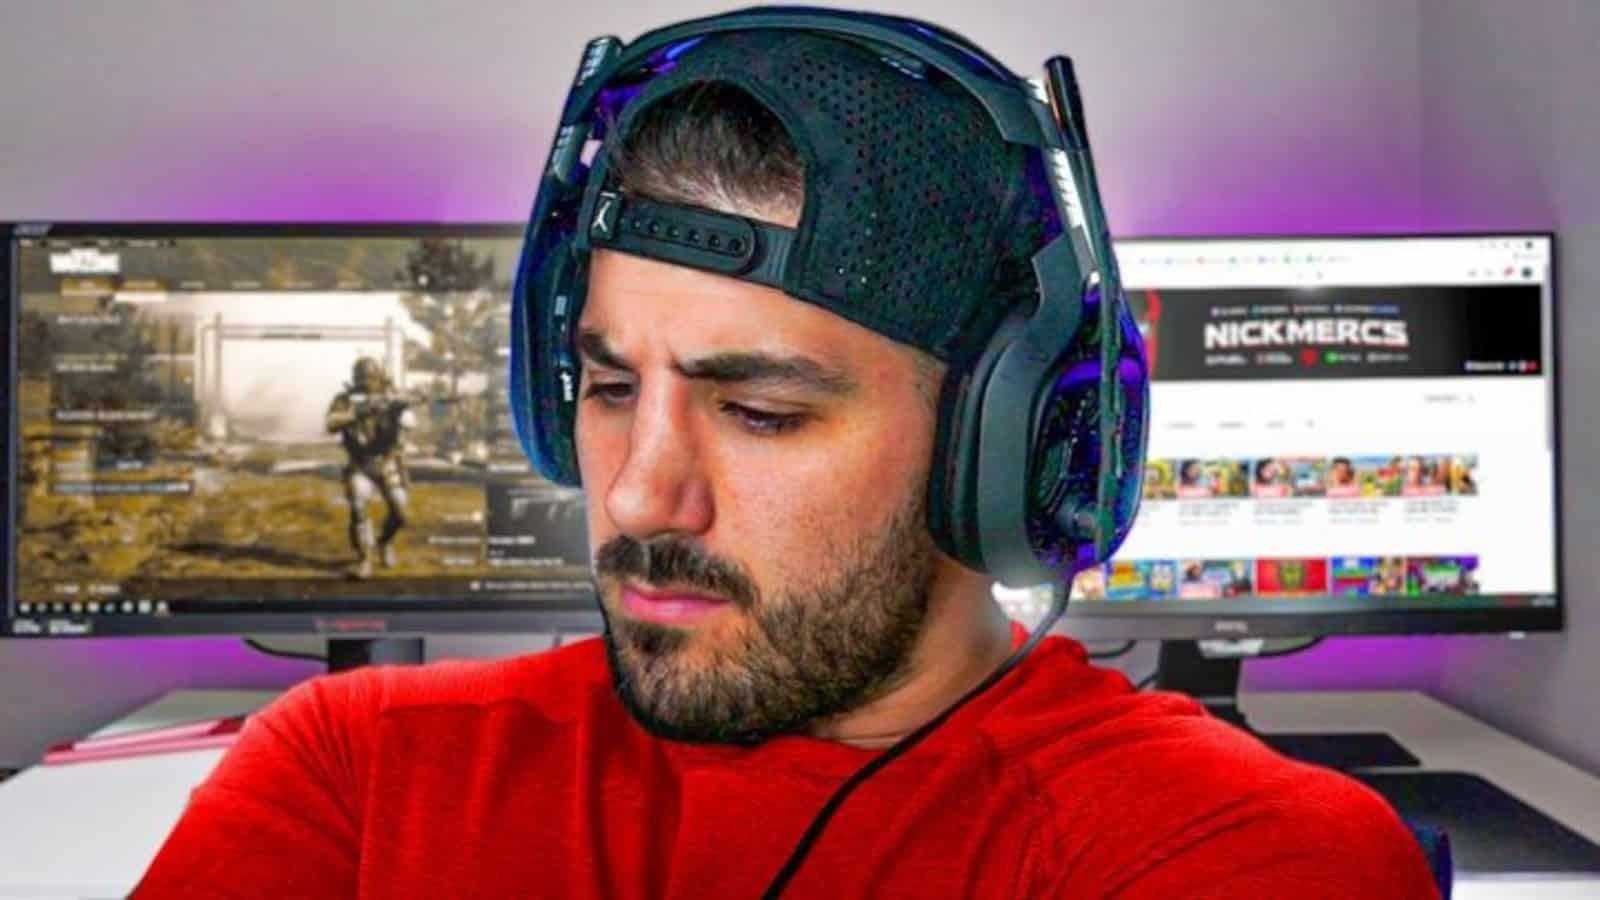 NICKMERCS looking grumpy with YouTube and Warzone screens in background